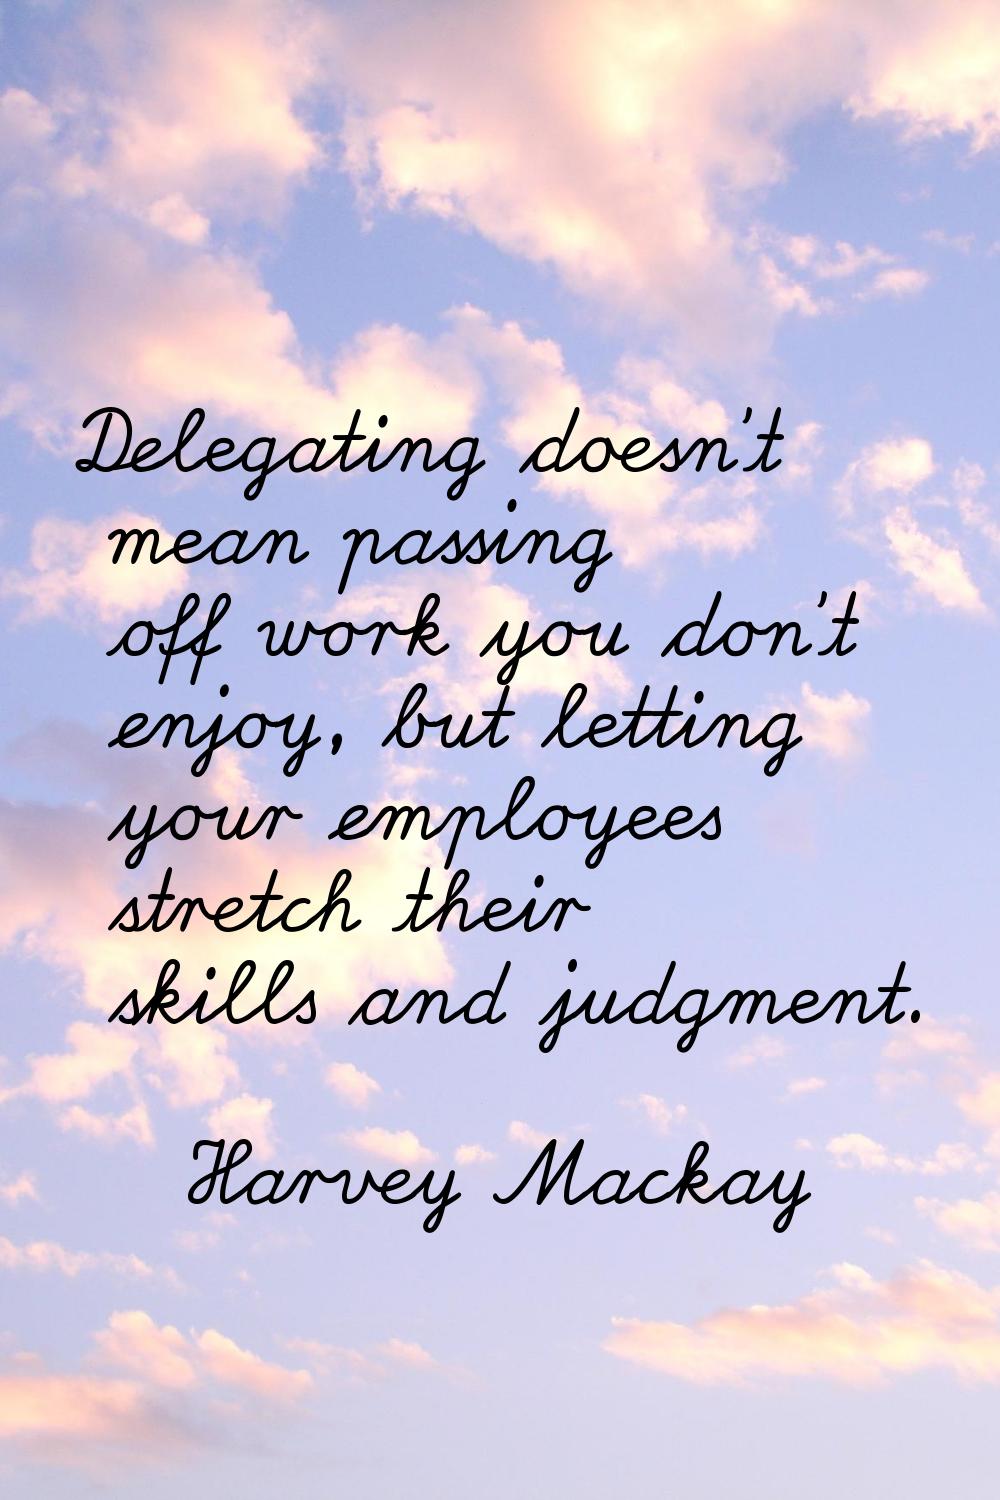 Delegating doesn't mean passing off work you don't enjoy, but letting your employees stretch their 